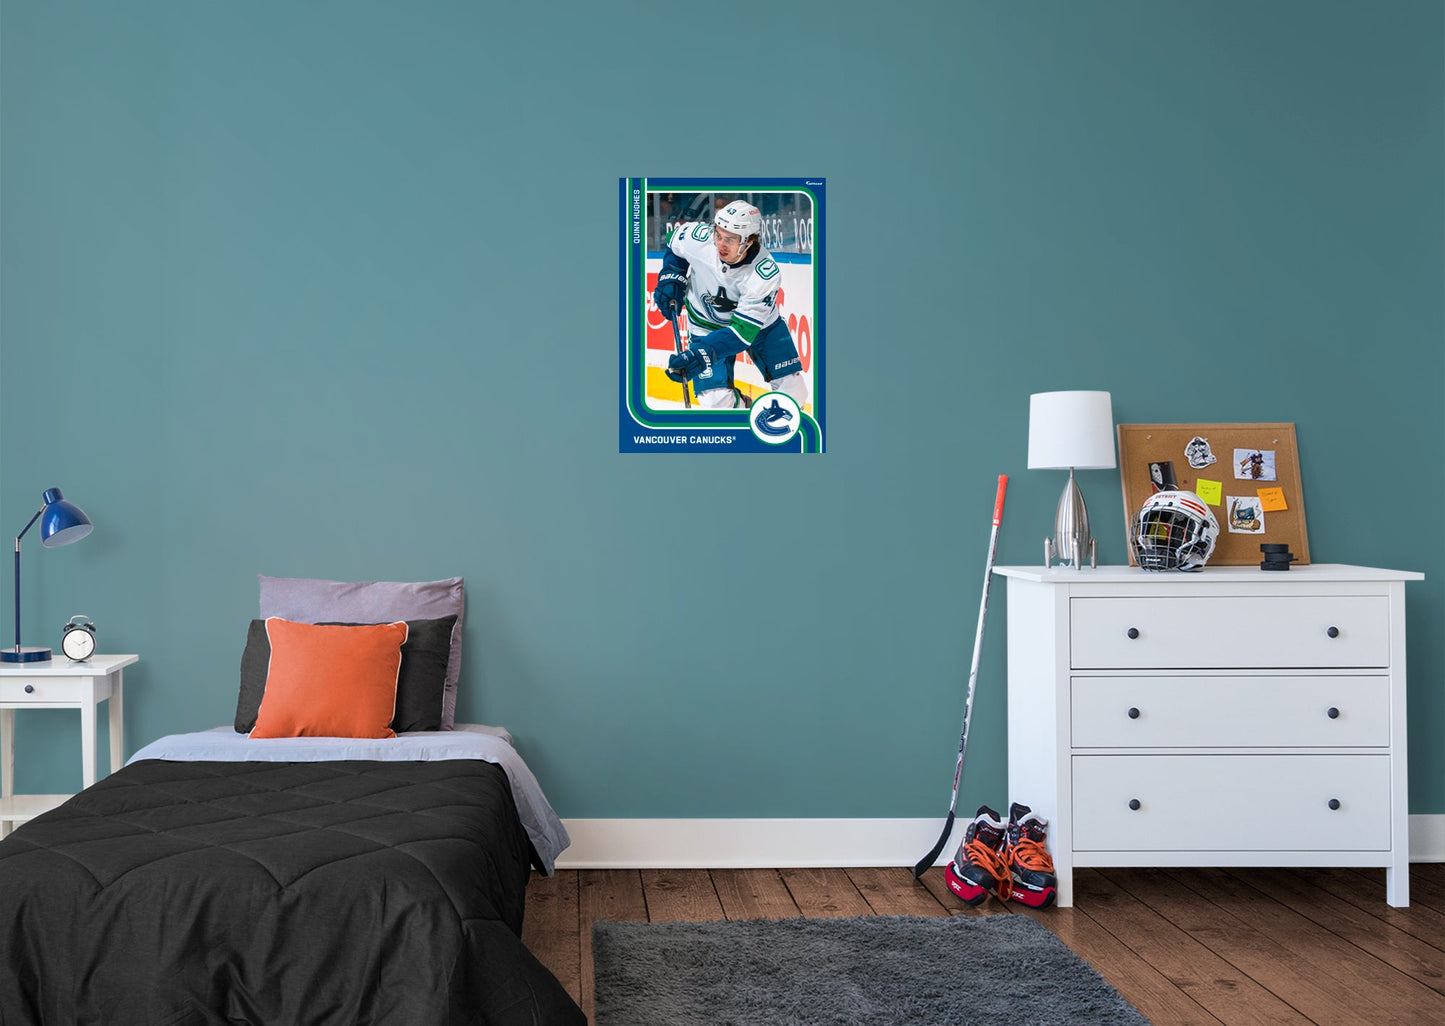 Vancouver Canucks: Quinn Hughes Poster - Officially Licensed NHL Removable Adhesive Decal